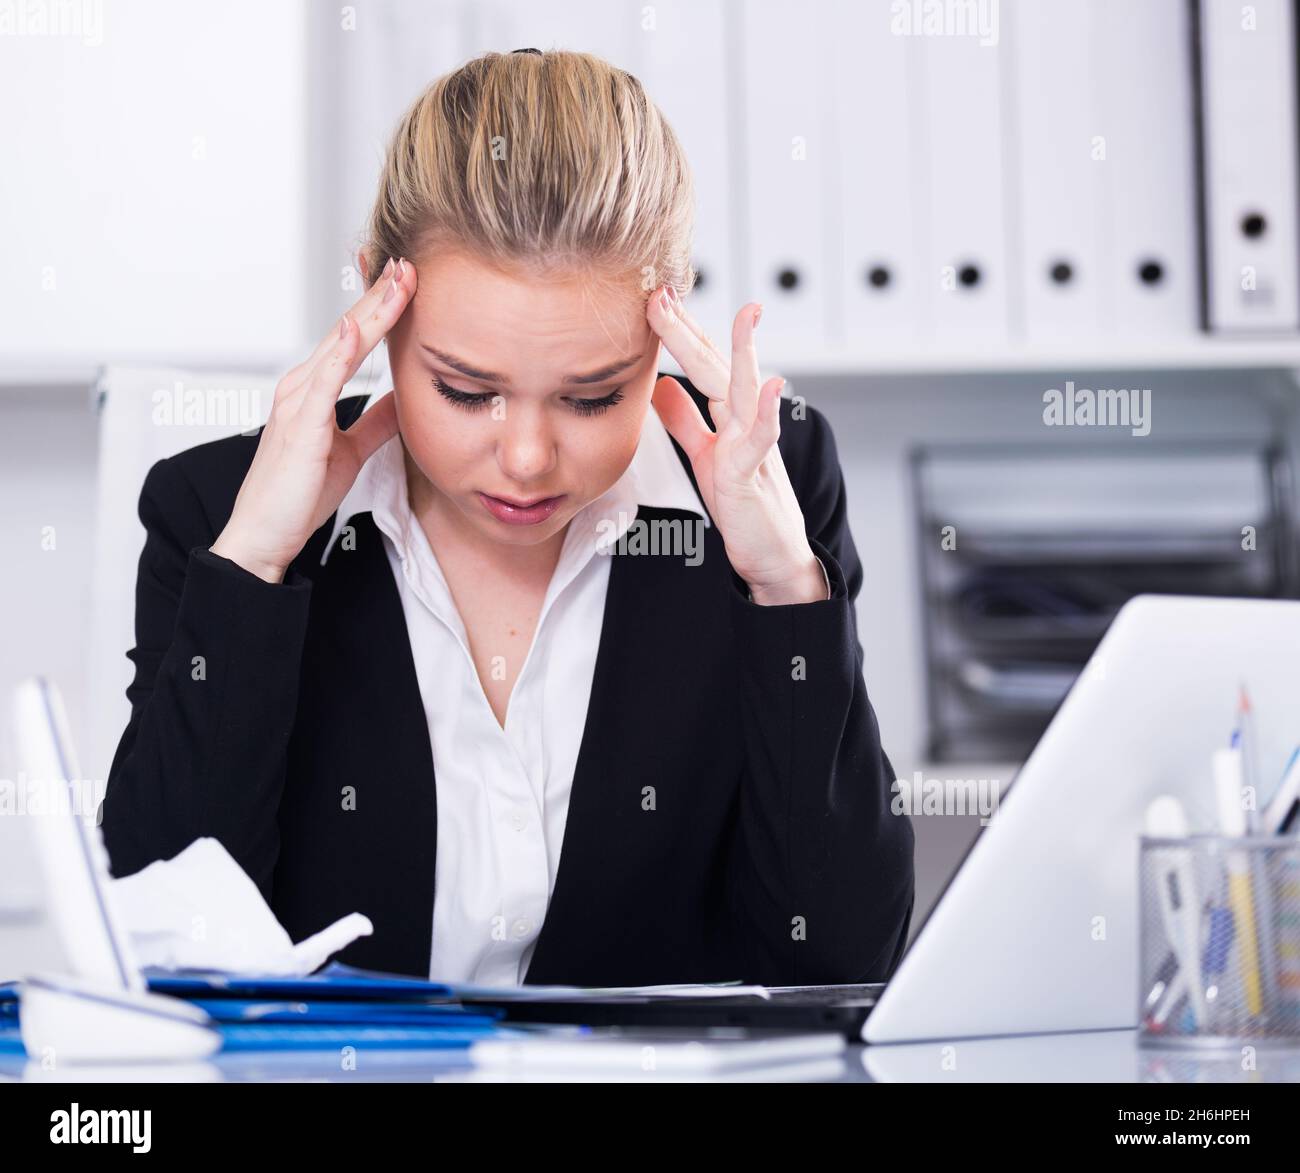 Frustrated business woman with papers Stock Photo